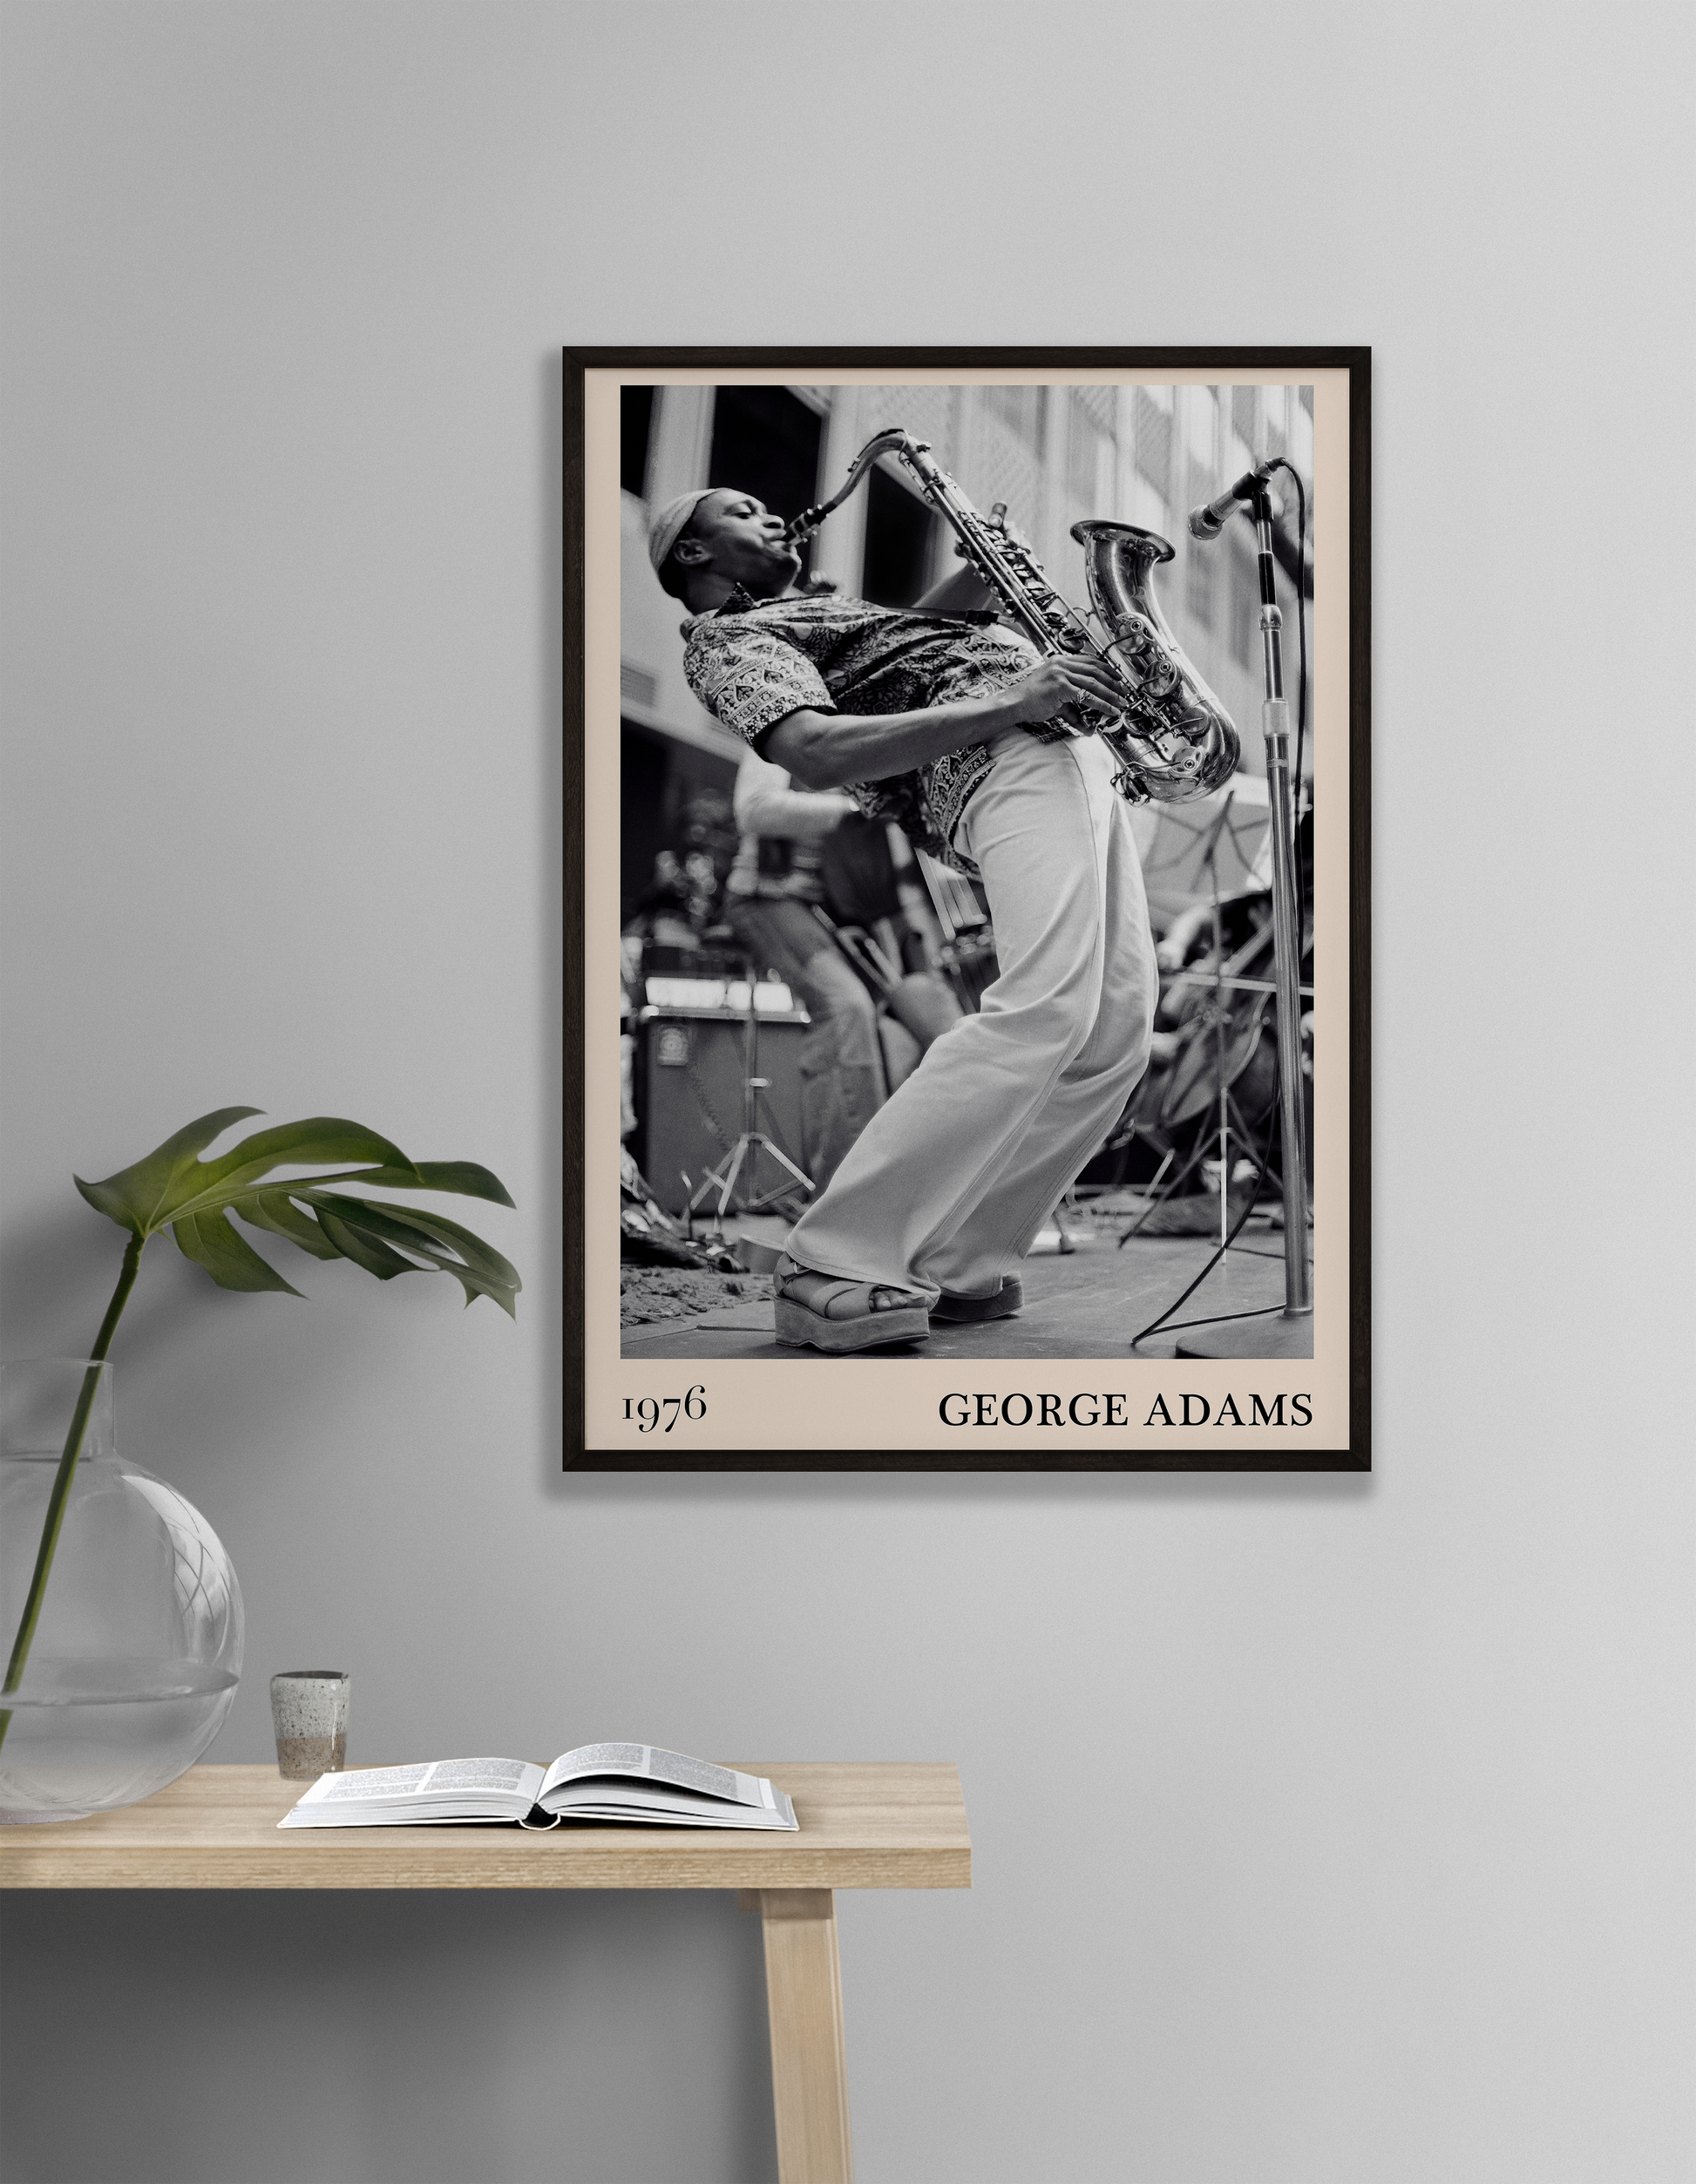 1976 photograph of George Adams taken by Thomas Marcello. Picture crafted into a cool black framed jazz print, with an off-white border. Poster is hanging on a off-white living room wall.